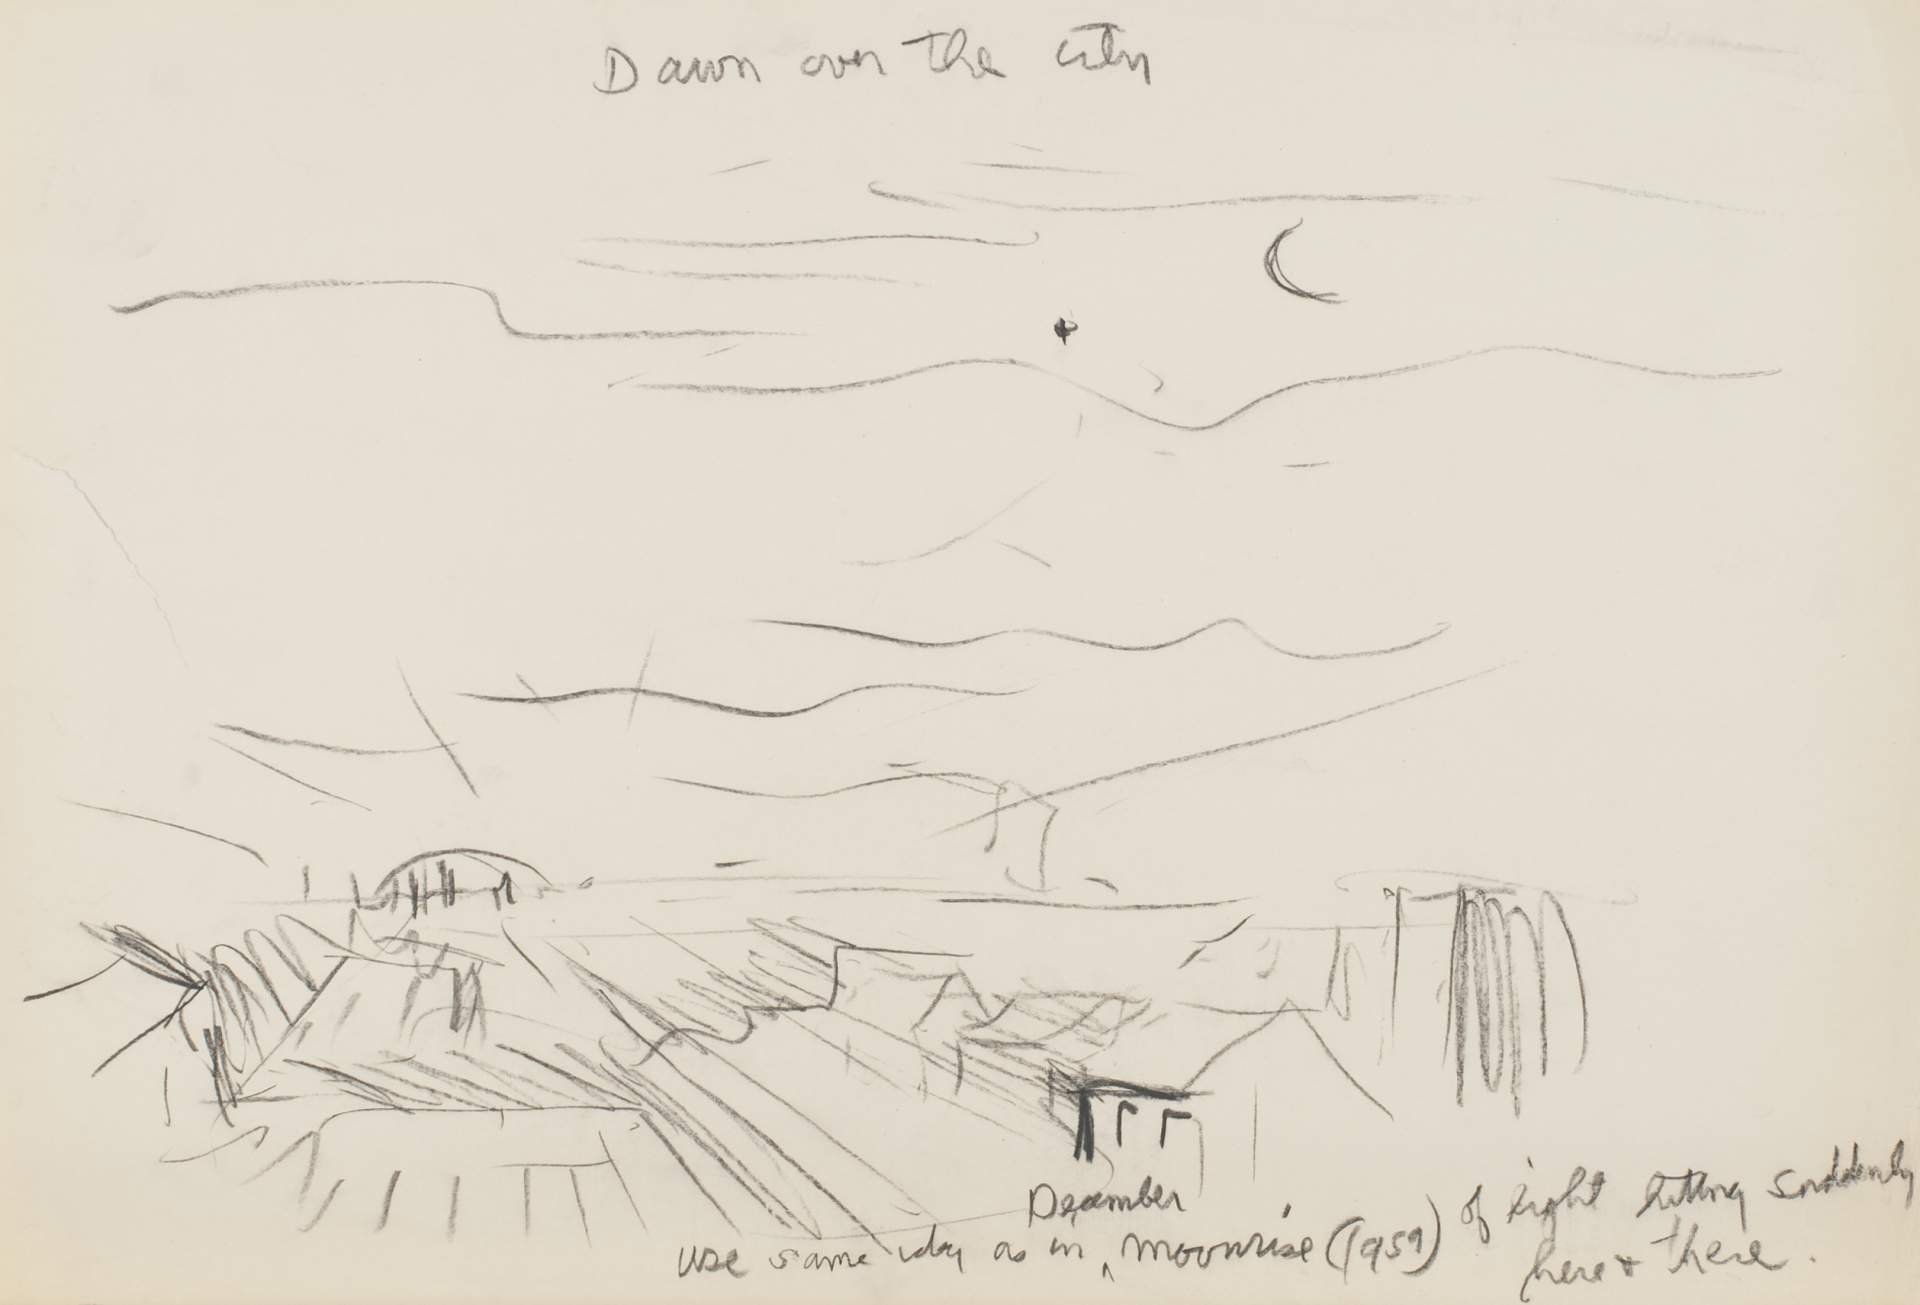 Untitled (Study for Dawn Over the City)